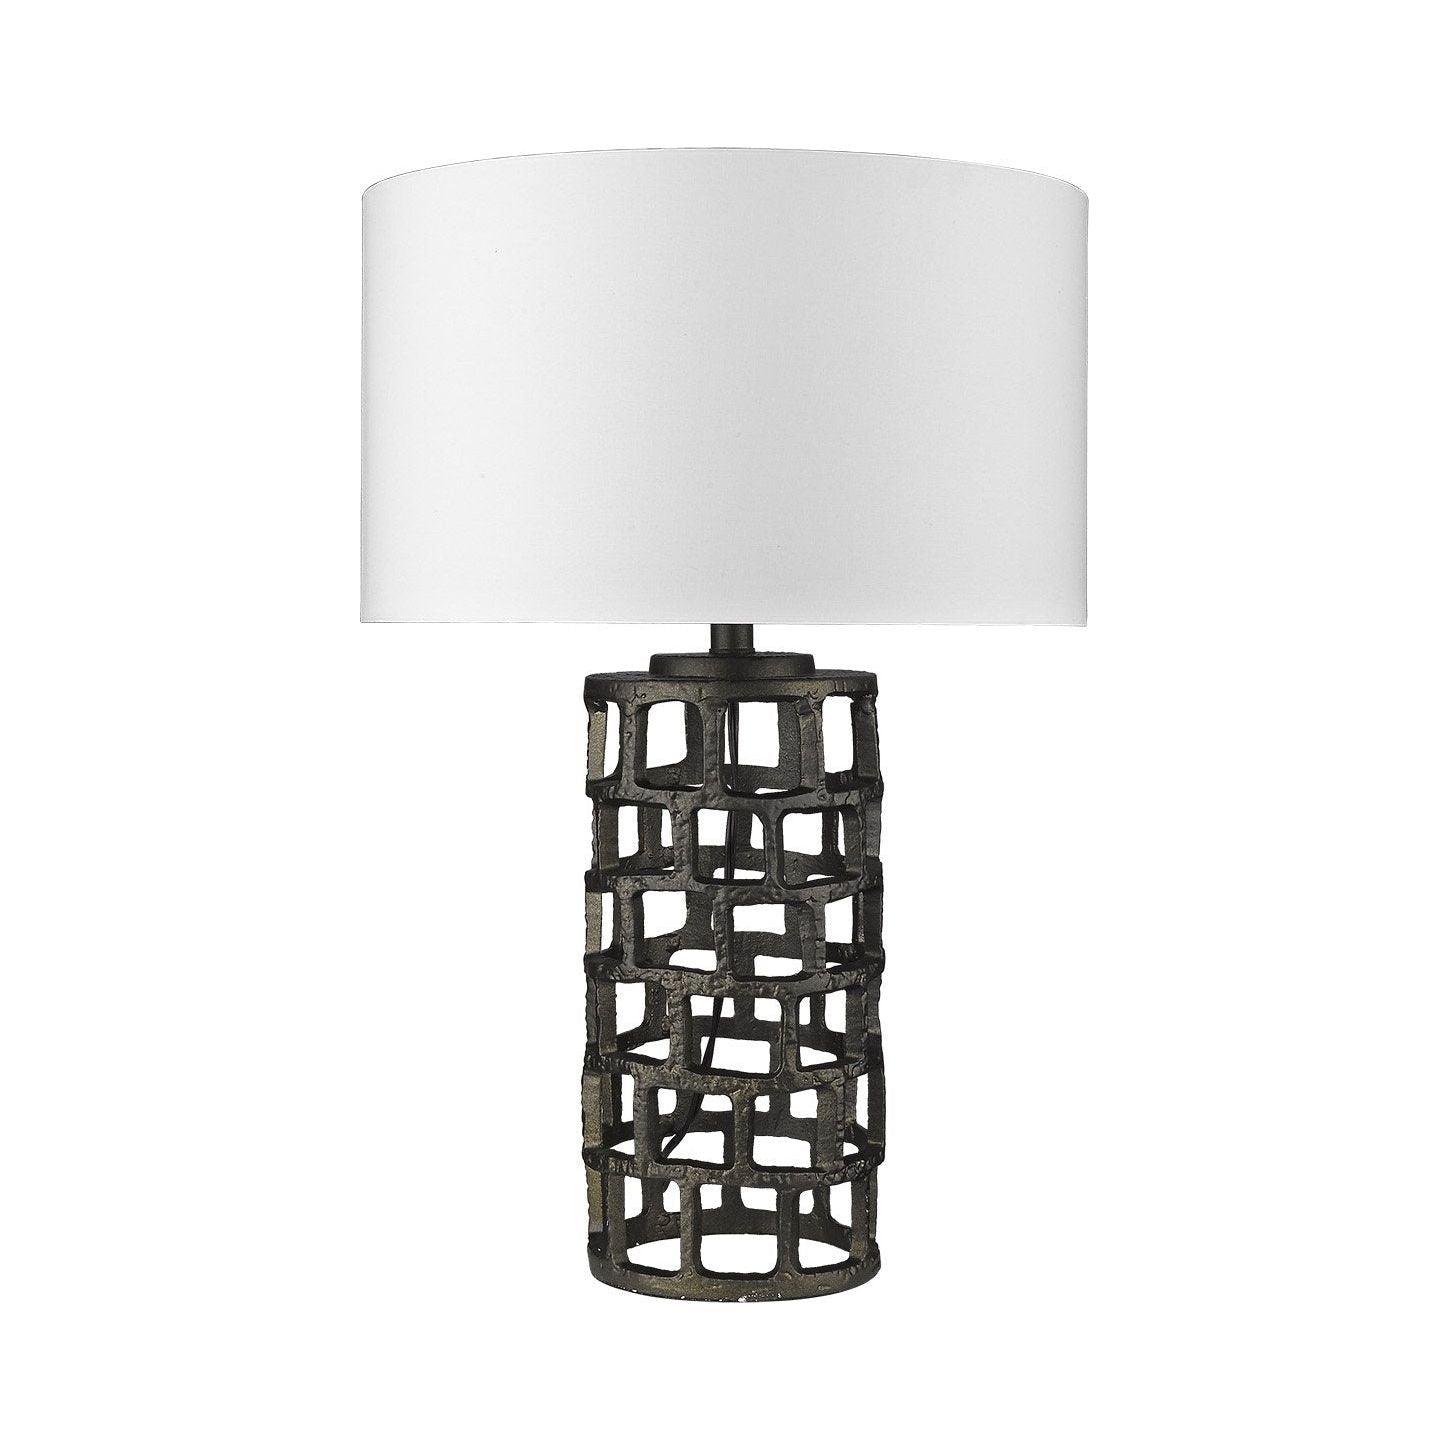 Trend - Vallin Table Lamp - Lights Canada